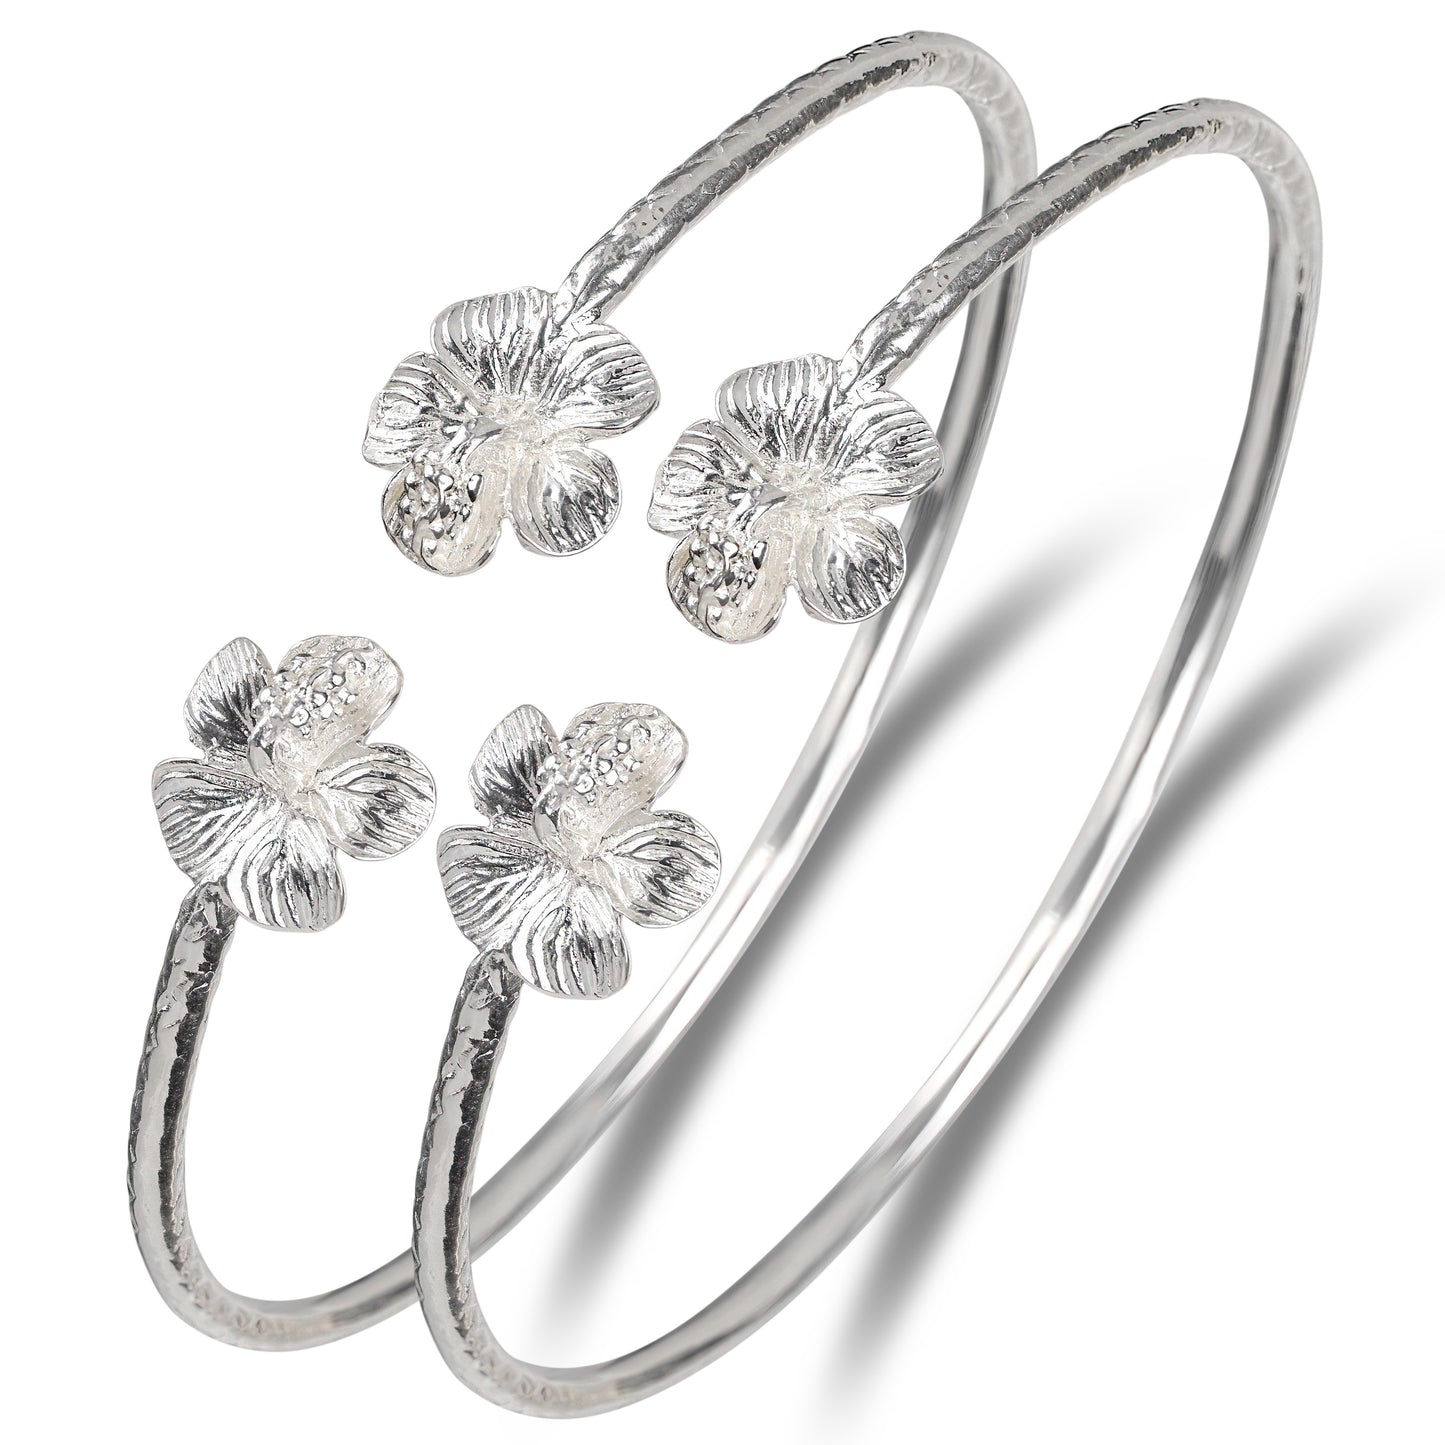 Better Jewelry Flower .925 Sterling Silver West Indian Bangles (Pair) (Made in USA)